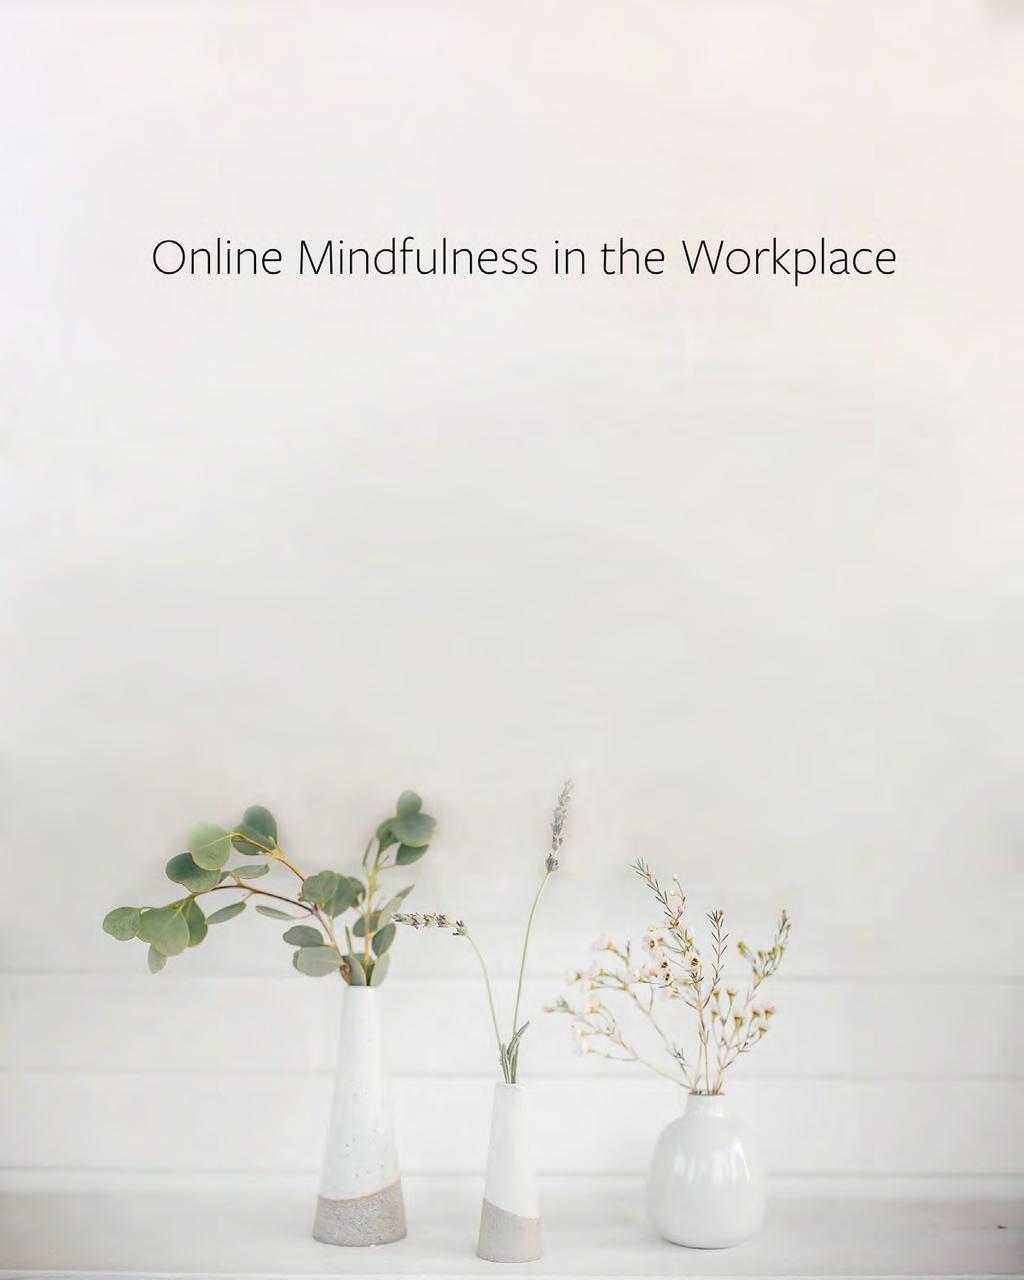 A study at Duke University showed equivalent results for online versus in-person mindfulness training at work.